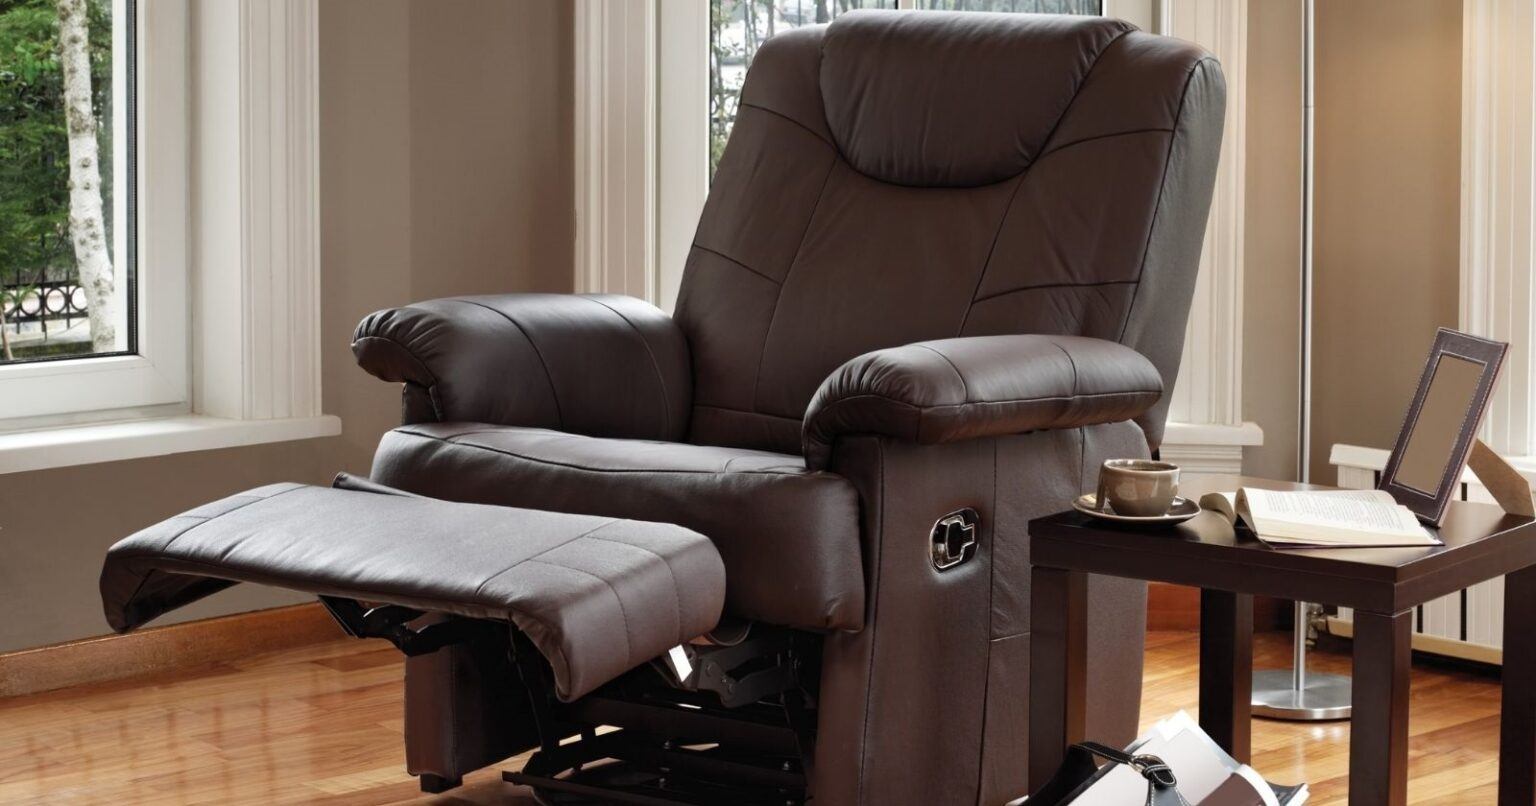 How To Take Apart Recliner